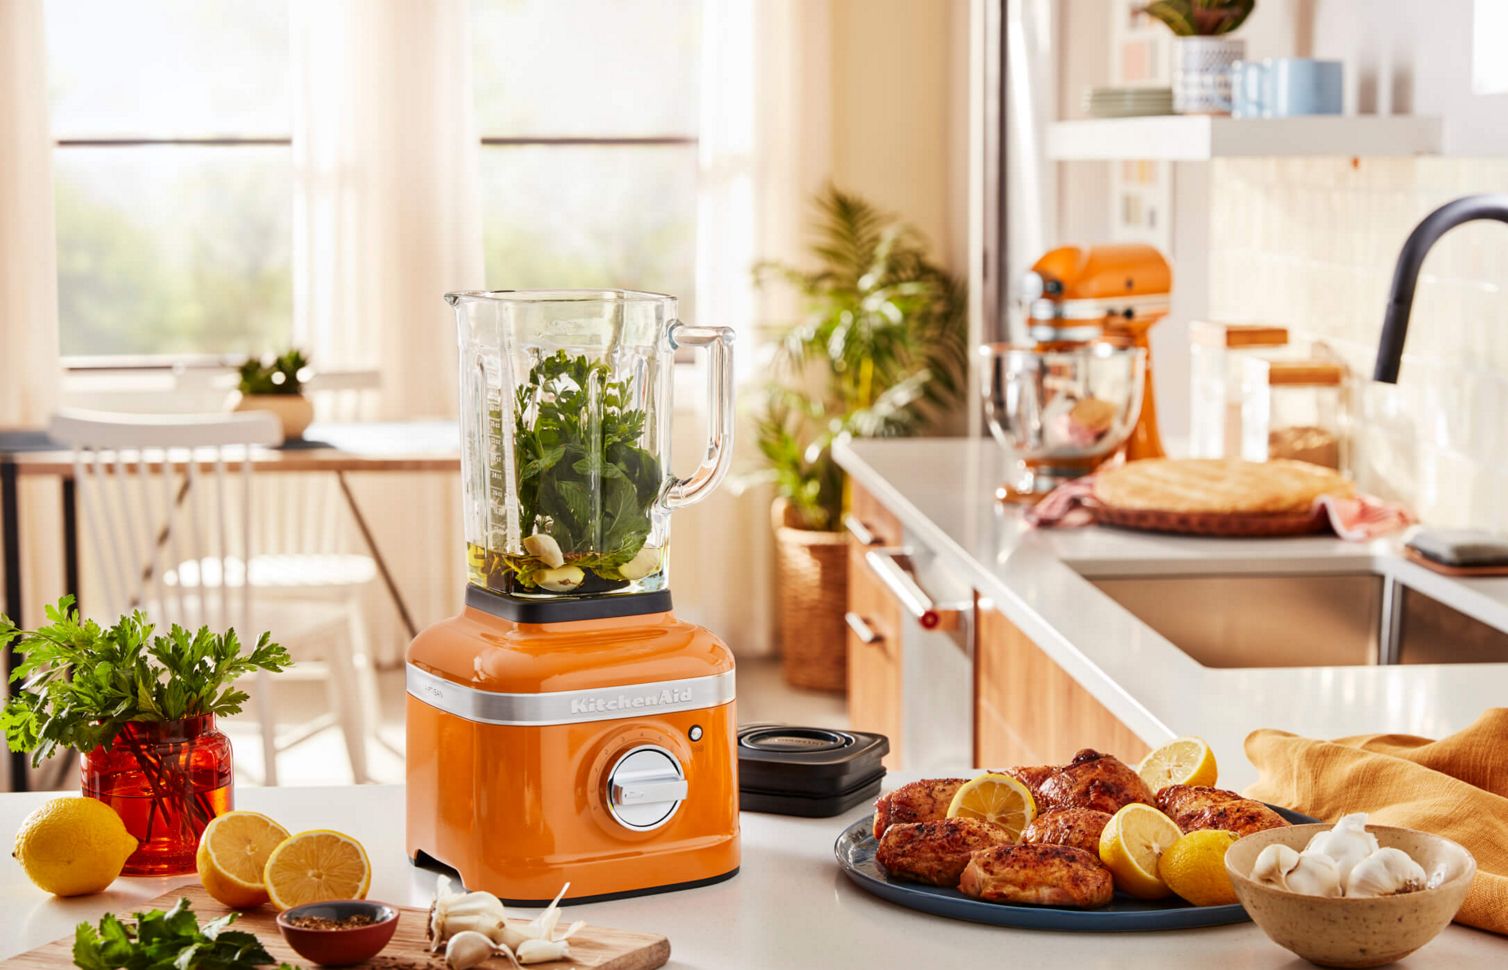 A kitchen featuring a KitchenAid® Blender in Honey filled with garlic, oil and other herbs.